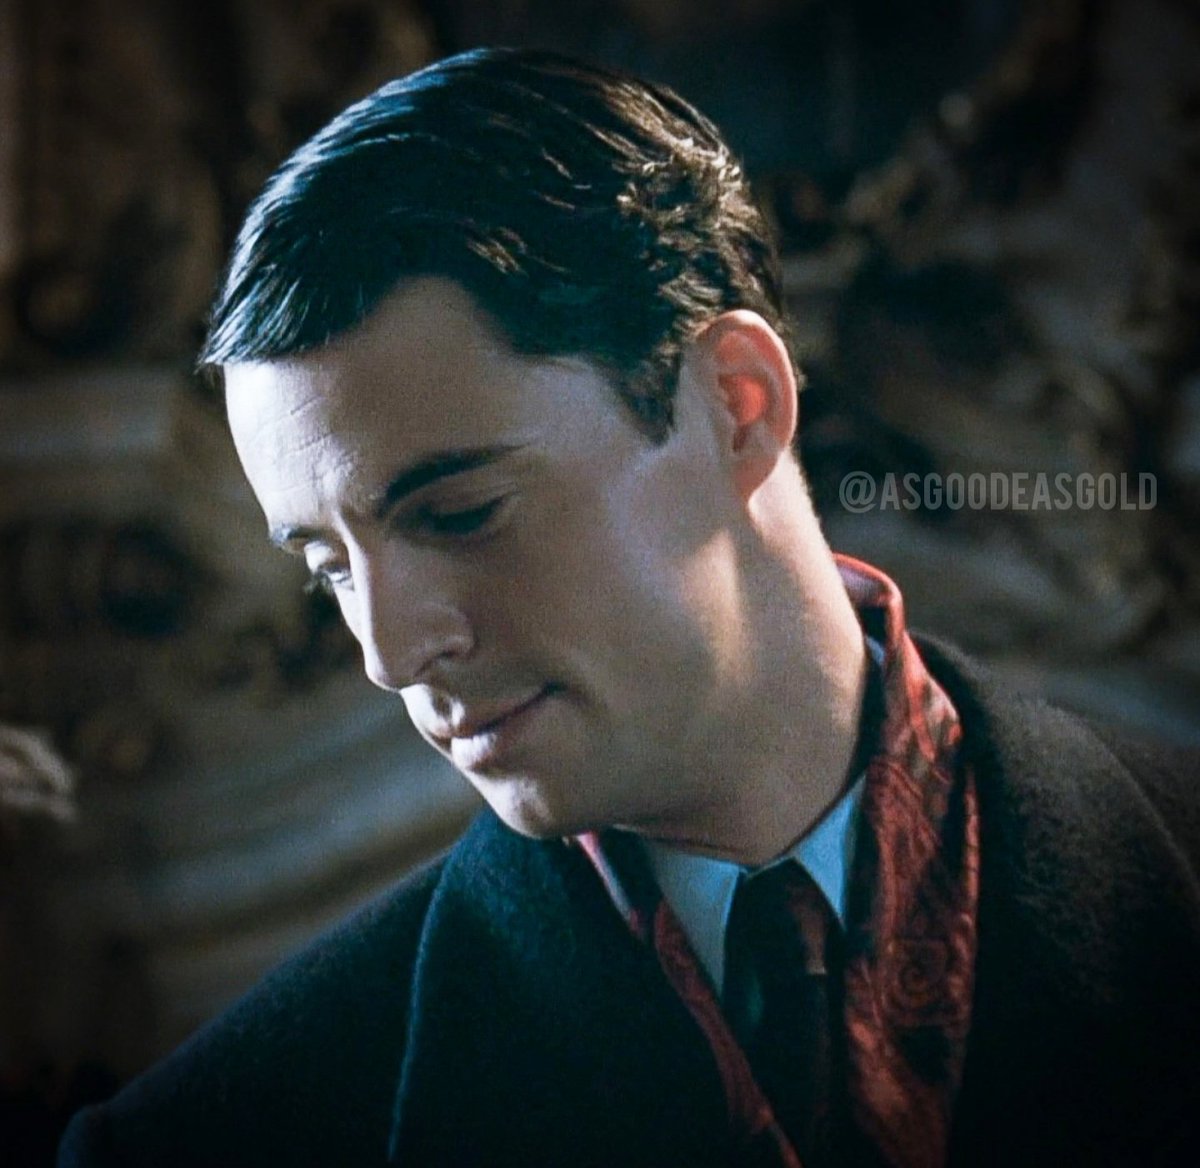 Timeless beauty. Touched by the gods.
#matthewgoode #charlesryder #bridesheadrevisited
📷 Brideshead Revisisted (2008) my edit
See other post for reel/GIFs